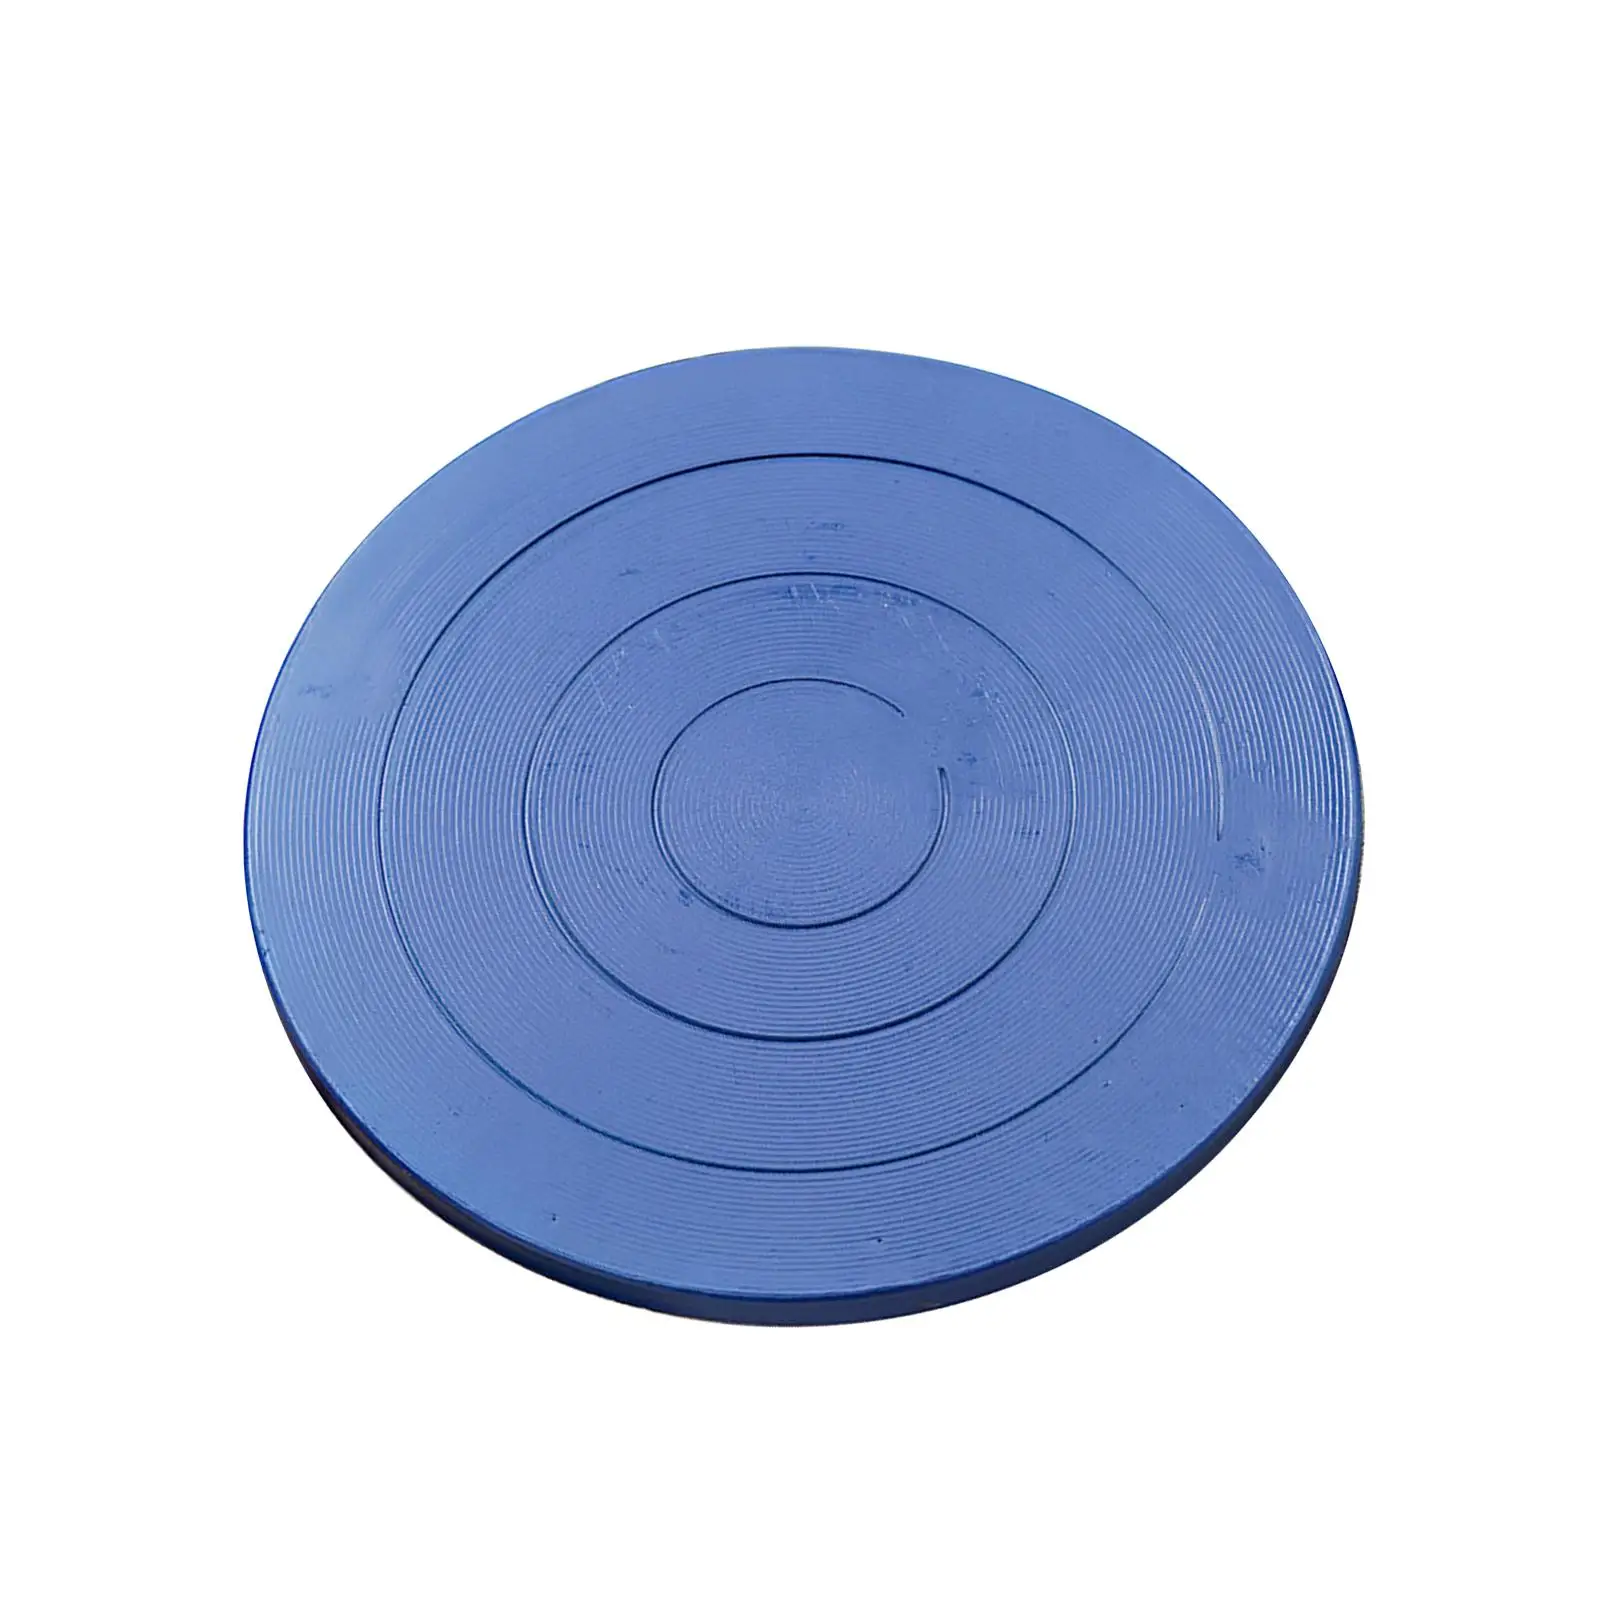 Pottery Turntable Wheel for Sculpting Pottery Decorating Banding Wheel Metal Turn Table Stand Double Side Revolving Cake Stand